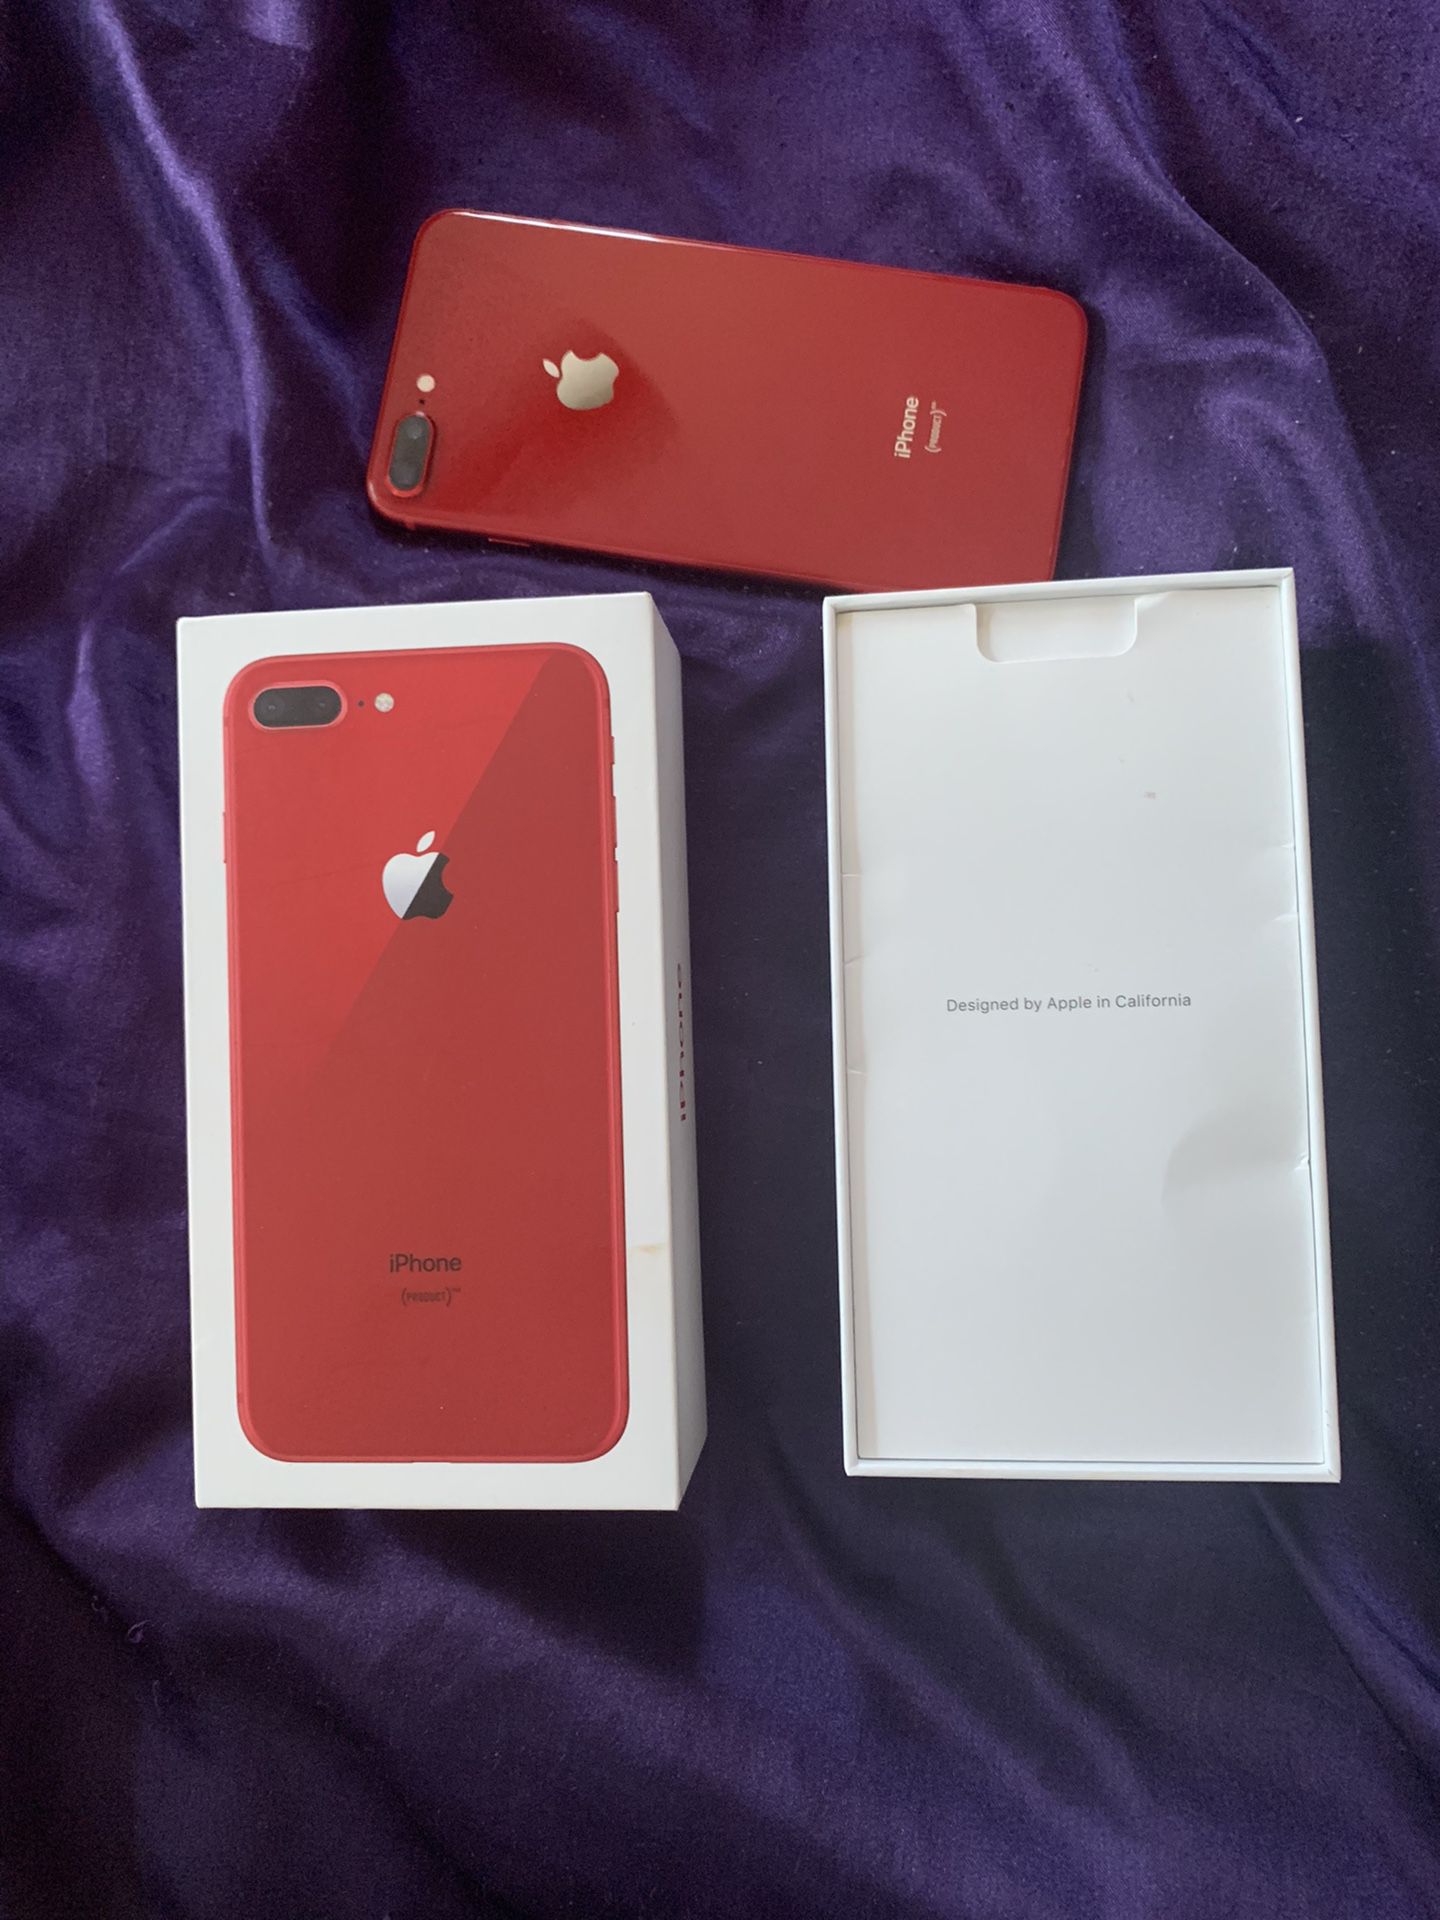 Red iPhone 8 Plus 256gb (like new)with box